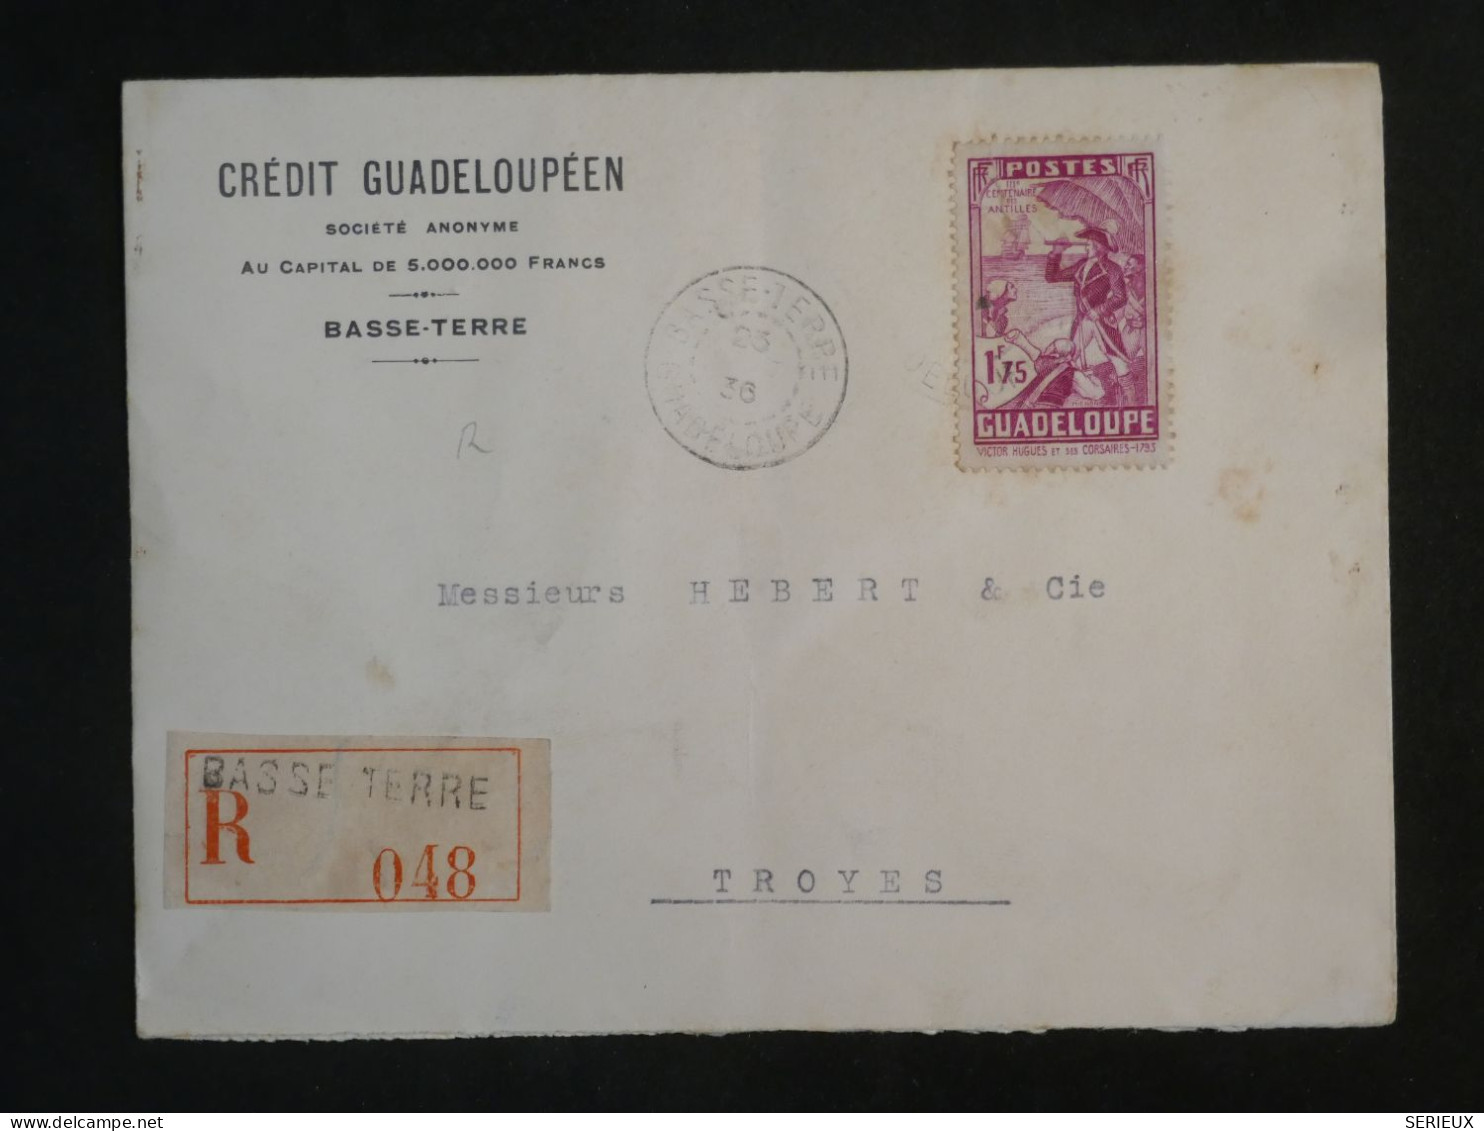 DK 16 GUADELOUPE  BELLE  LETTRE  RECO  1938 BASSE TERRE   A  TROYES   FRANCE + +AFF. INTERESSANT+++ + - Covers & Documents